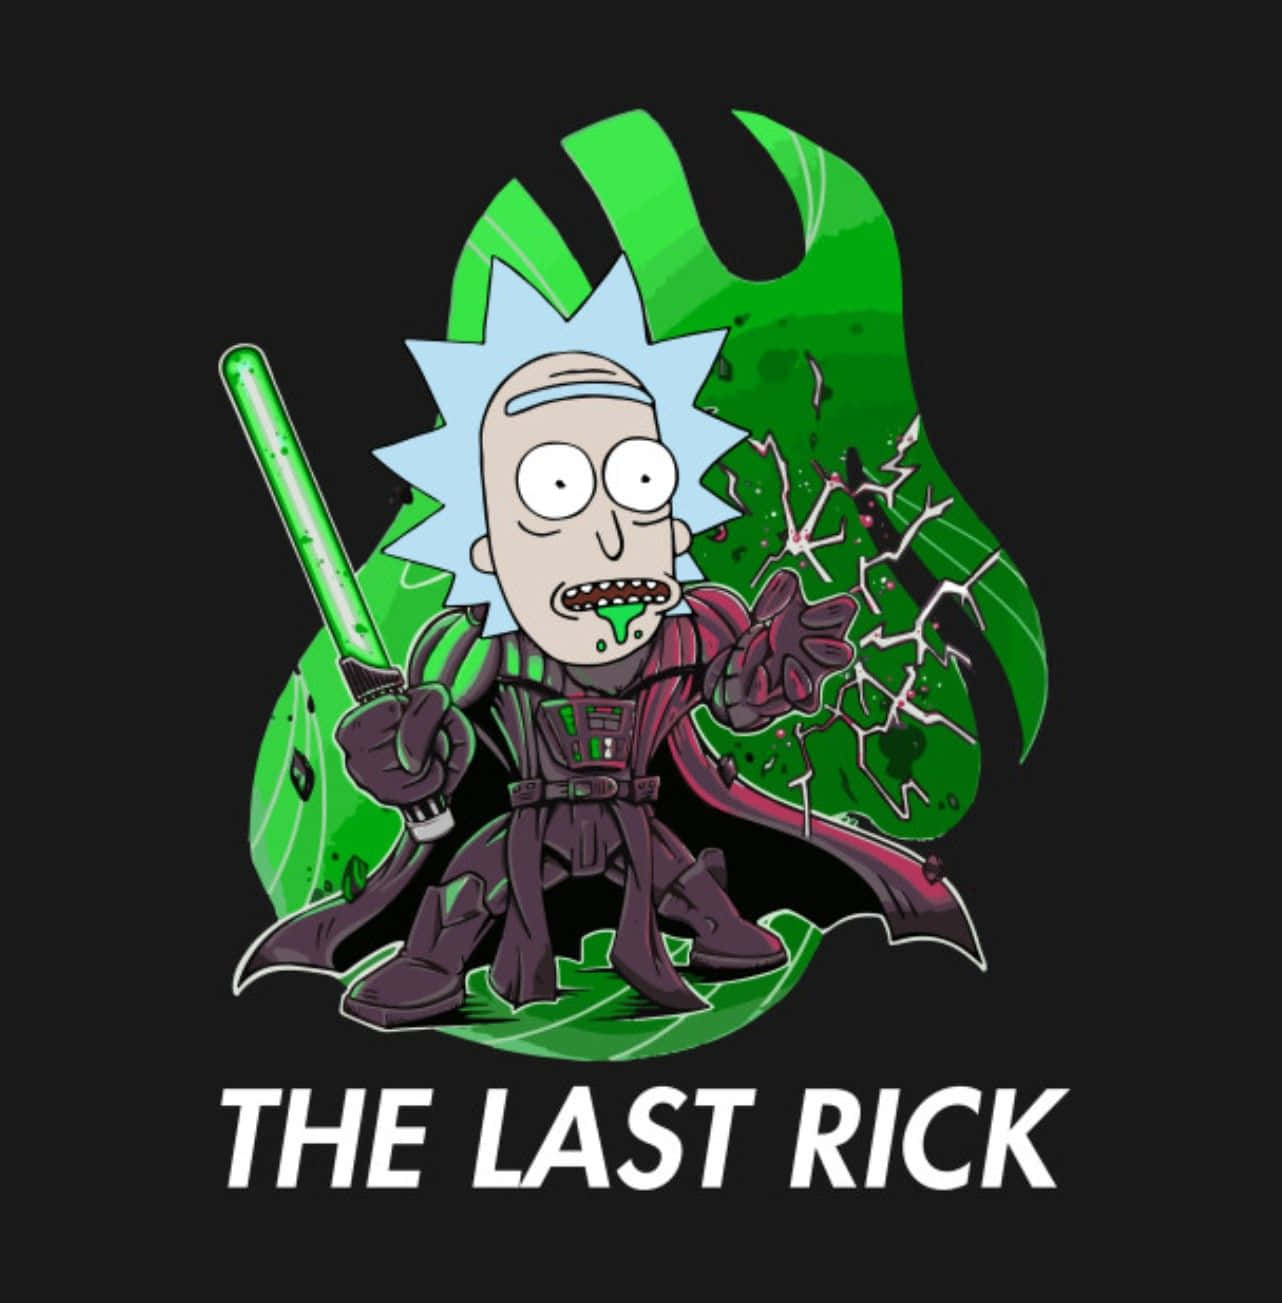 The Council of Ricks convenes in their Citadel from the multiverse Wallpaper